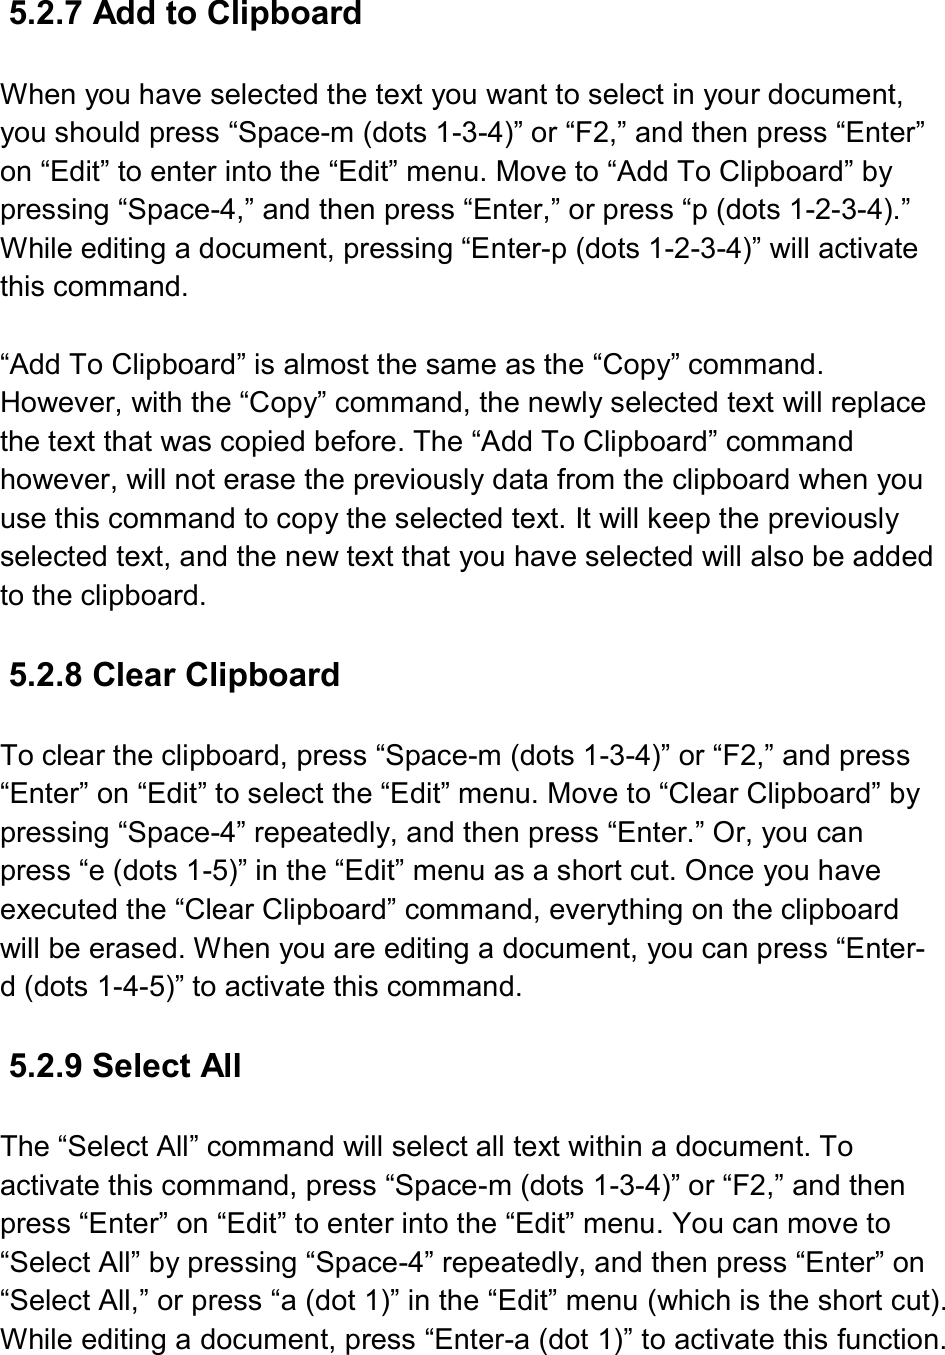  5.2.7 Add to Clipboard  When you have selected the text you want to select in your document, you should press “Space-m (dots 1-3-4)” or “F2,” and then press “Enter” on “Edit” to enter into the “Edit” menu. Move to “Add To Clipboard” by pressing “Space-4,” and then press “Enter,” or press “p (dots 1-2-3-4).” While editing a document, pressing “Enter-p (dots 1-2-3-4)” will activate this command.  “Add To Clipboard” is almost the same as the “Copy” command. However, with the “Copy” command, the newly selected text will replace the text that was copied before. The “Add To Clipboard” command however, will not erase the previously data from the clipboard when you use this command to copy the selected text. It will keep the previously selected text, and the new text that you have selected will also be added to the clipboard.  5.2.8 Clear Clipboard  To clear the clipboard, press “Space-m (dots 1-3-4)” or “F2,” and press “Enter” on “Edit” to select the “Edit” menu. Move to “Clear Clipboard” by pressing “Space-4” repeatedly, and then press “Enter.” Or, you can press “e (dots 1-5)” in the “Edit” menu as a short cut. Once you have executed the “Clear Clipboard” command, everything on the clipboard will be erased. When you are editing a document, you can press “Enter-d (dots 1-4-5)” to activate this command.  5.2.9 Select All  The “Select All” command will select all text within a document. To activate this command, press “Space-m (dots 1-3-4)” or “F2,” and then press “Enter” on “Edit” to enter into the “Edit” menu. You can move to “Select All” by pressing “Space-4” repeatedly, and then press “Enter” on “Select All,” or press “a (dot 1)” in the “Edit” menu (which is the short cut). While editing a document, press “Enter-a (dot 1)” to activate this function.  